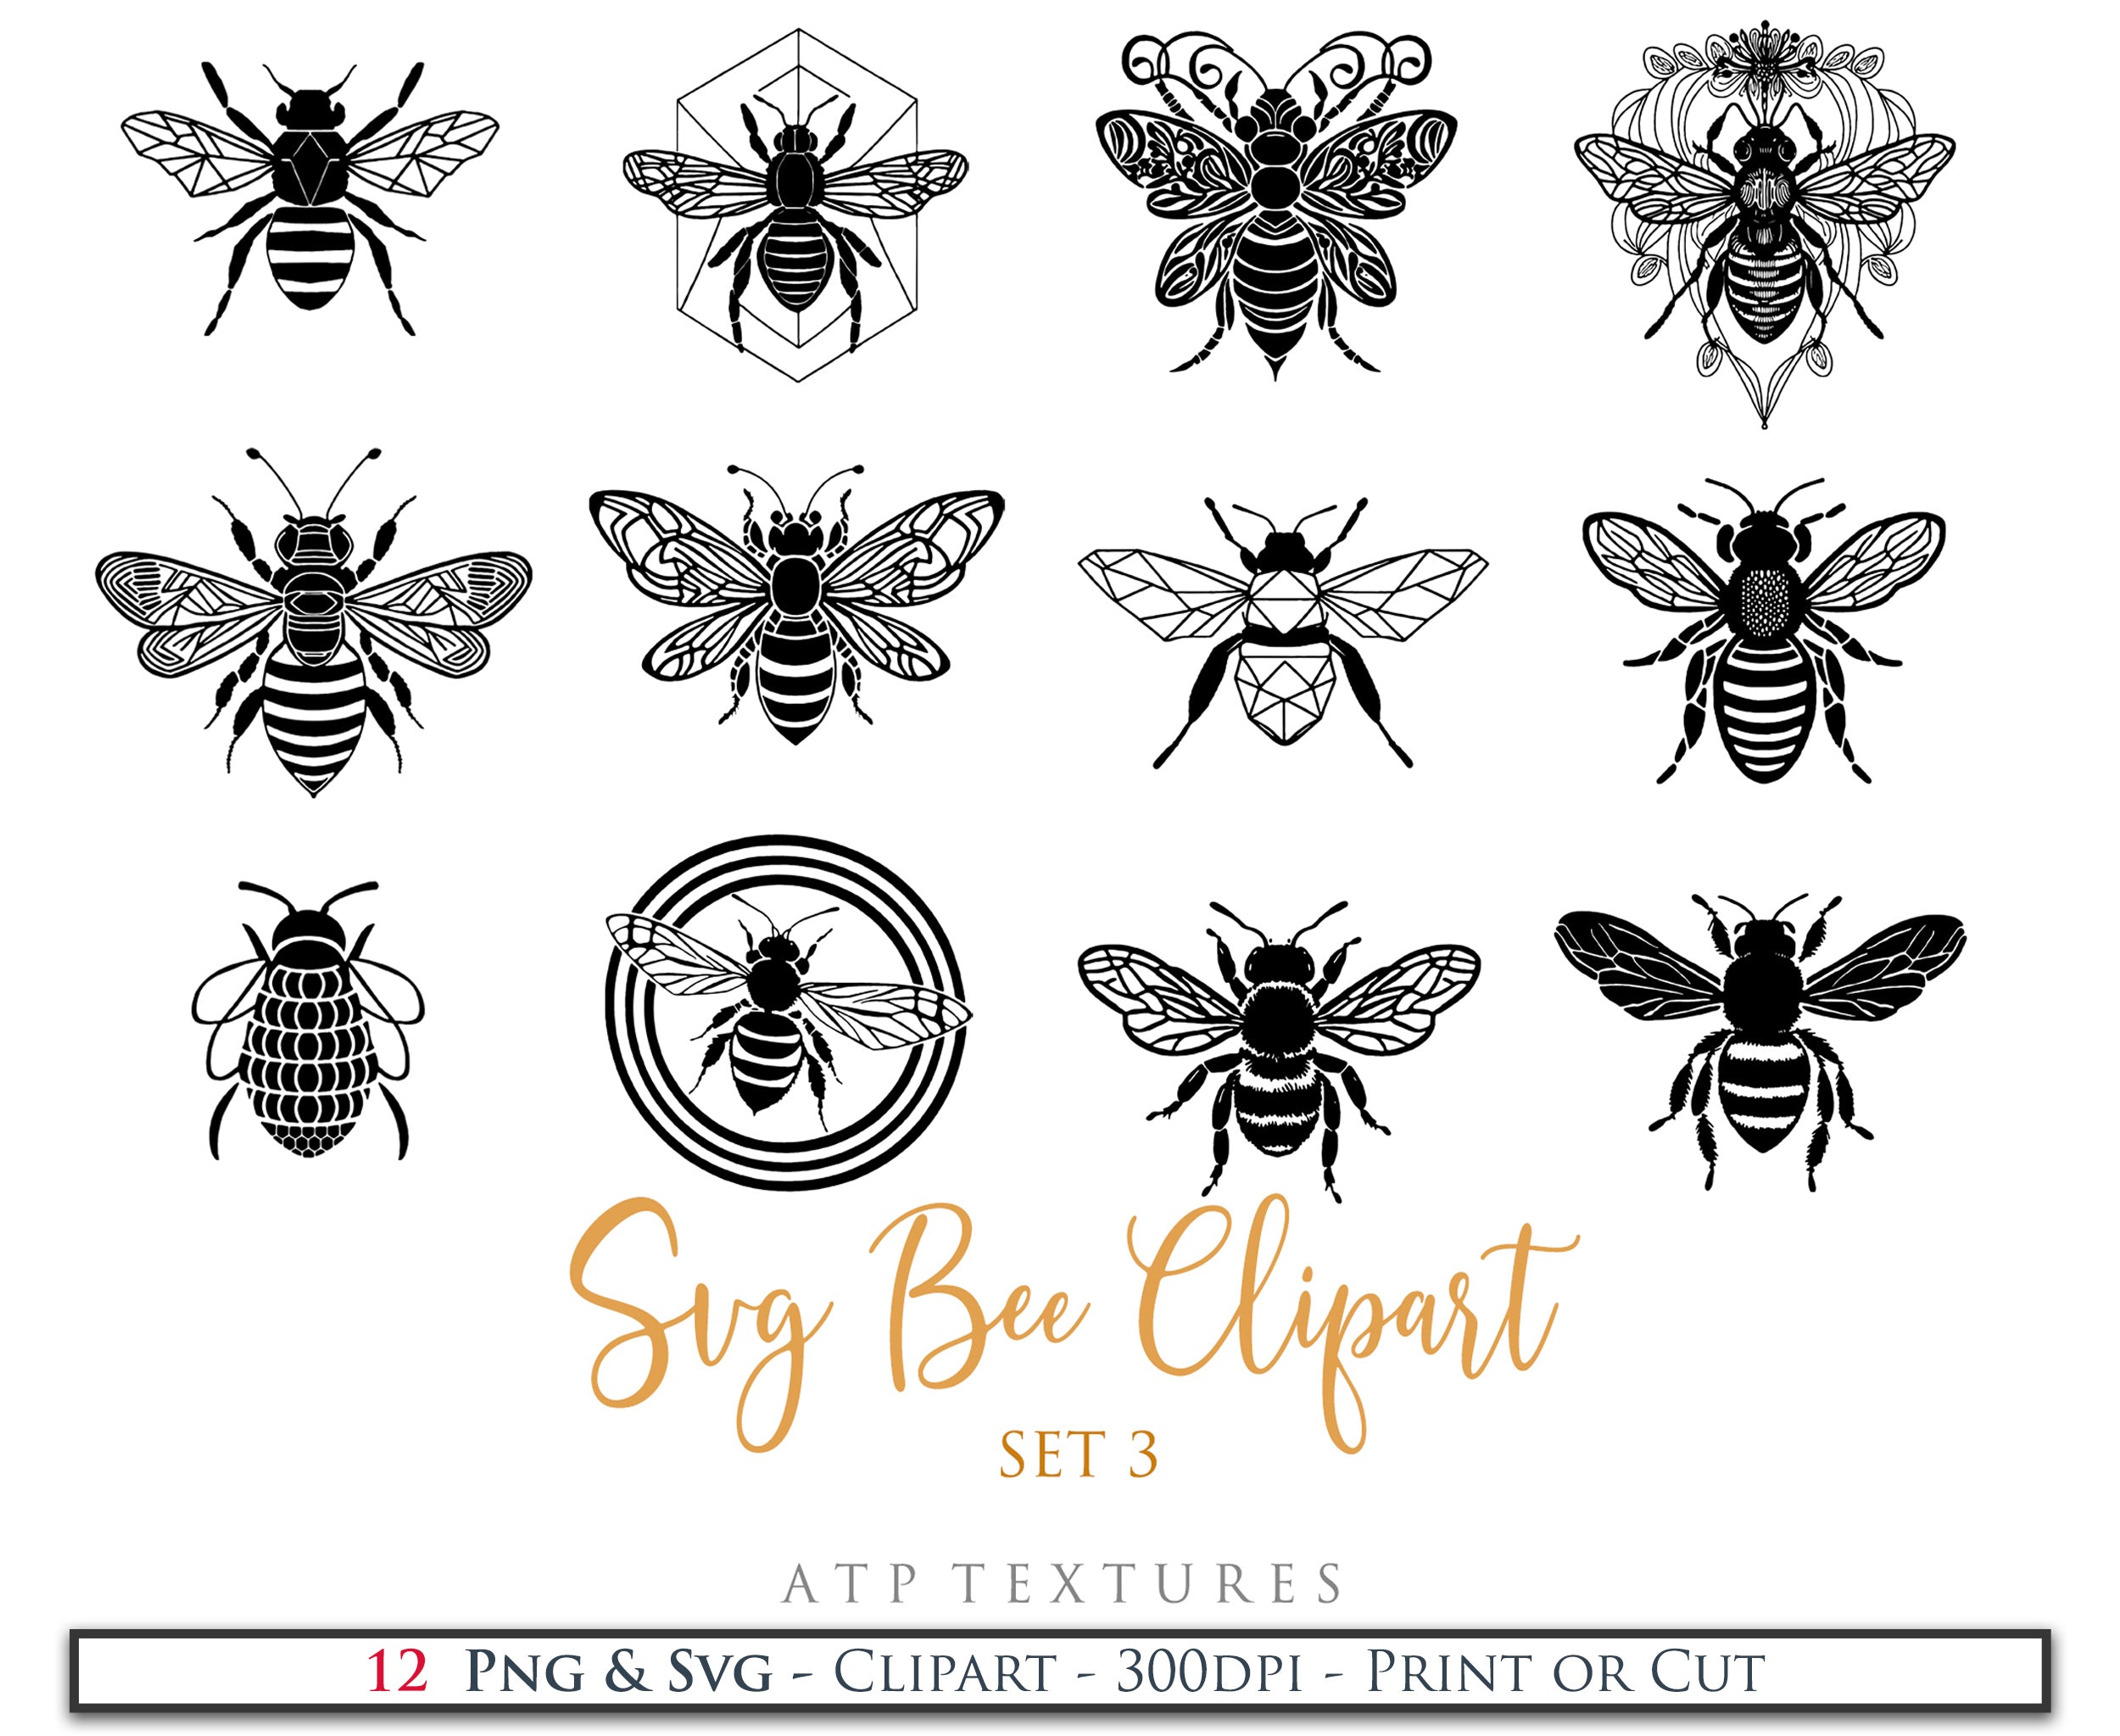 SVG Clipart for Cricut, Digital Art, Sublimation Print and Scrapbooking.Sweet Bees in High resolution.This is a digital product. This set includes 20 SVG & PNG Bee Clipart files. The PNG files are all in high resolution,300dpi.If you wish to use them for your fine art prints and photography edits without losing quality, you can! ATP Textures